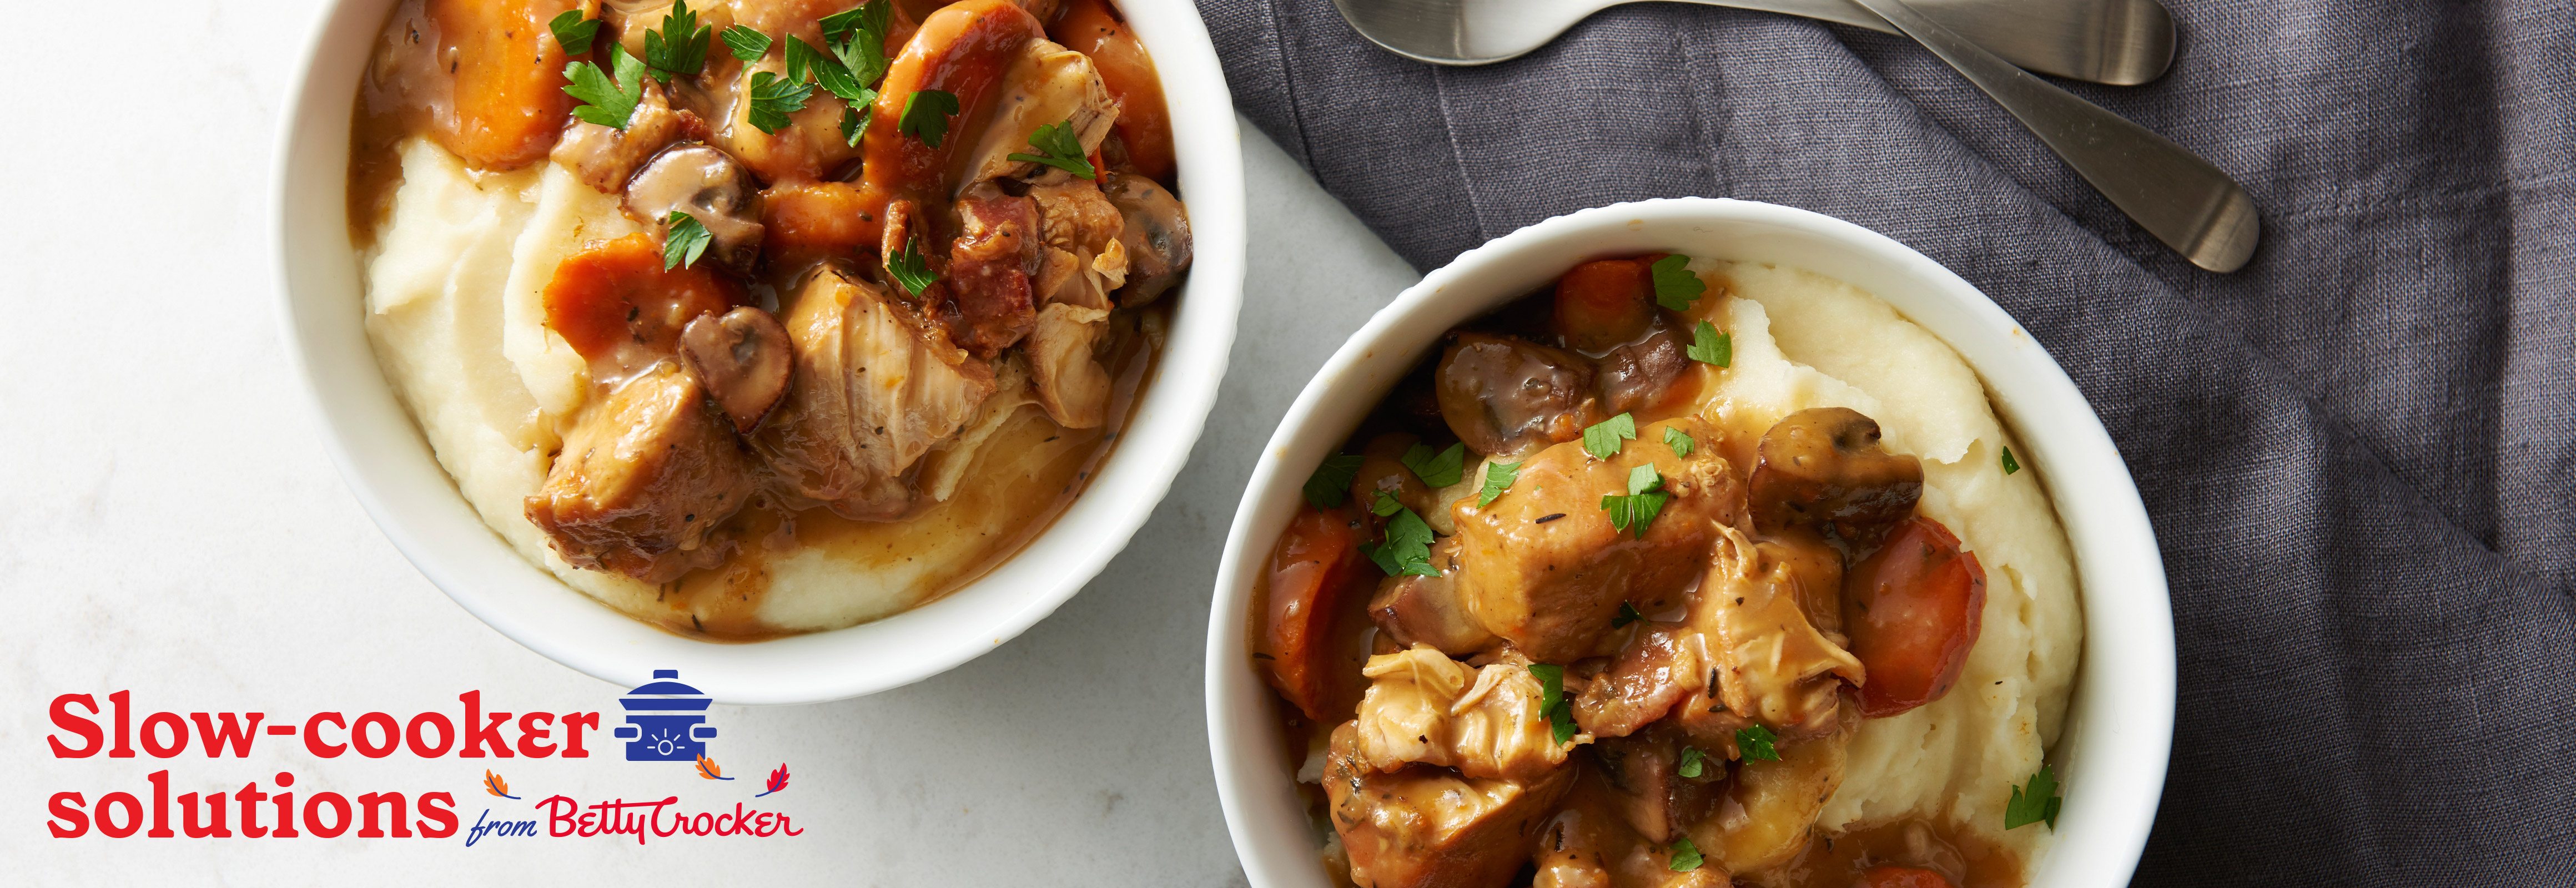 Slow-cooker solutions from Betty Crocker - Slow-Cooker Chicken Burgundy Stew